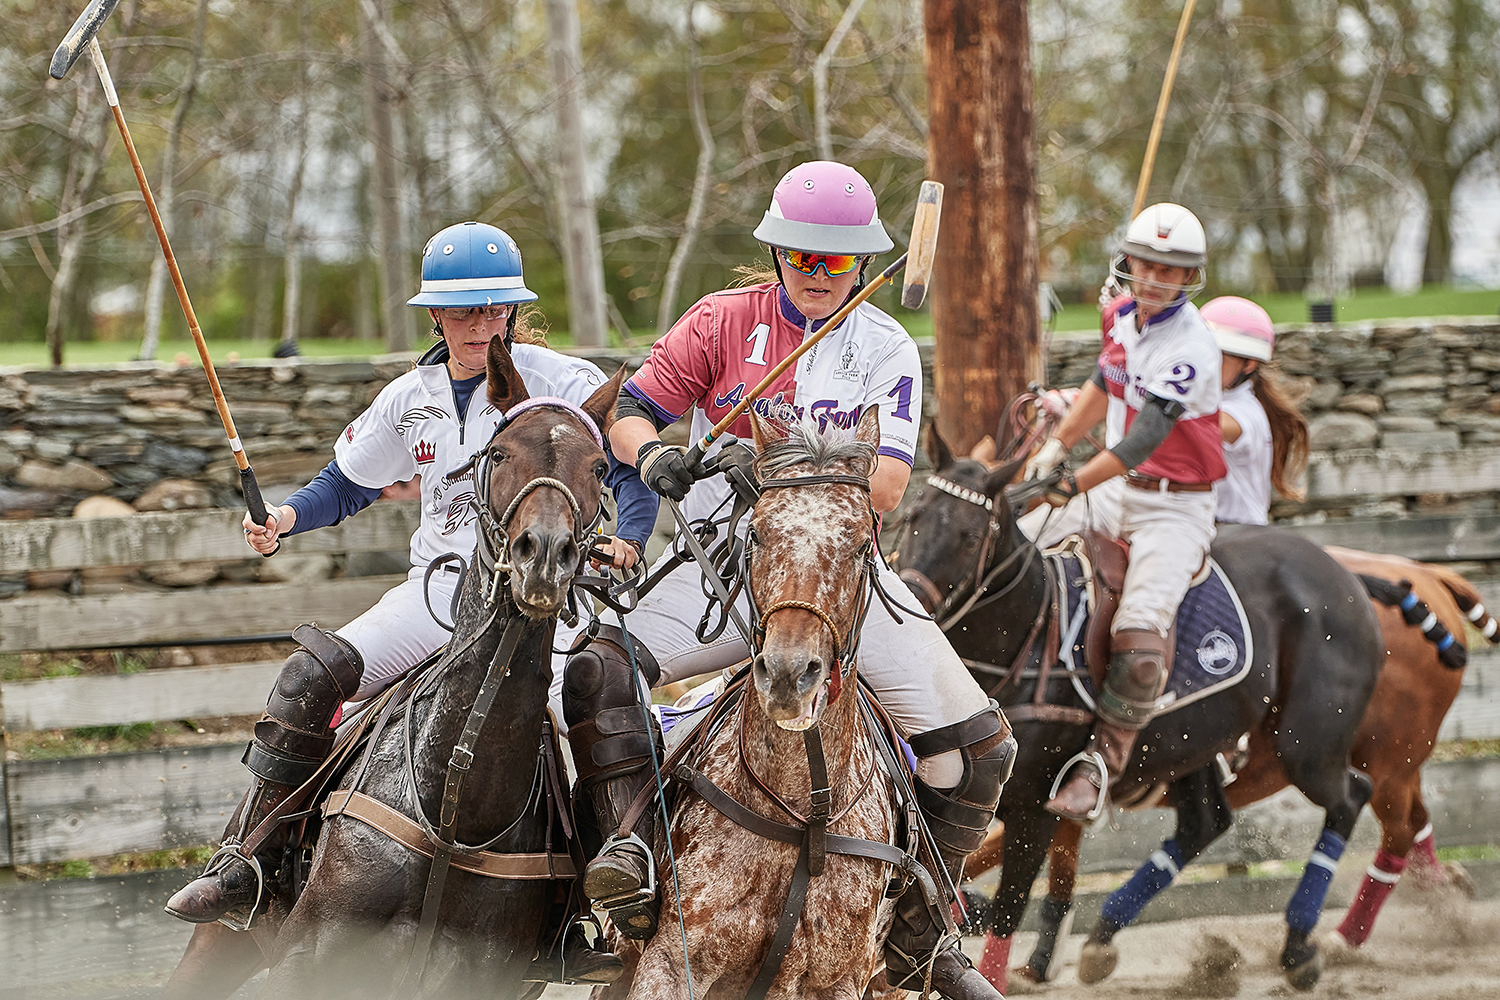 Hands-on Review: Shooting Arena Polo with the SIGMA 70-200mm